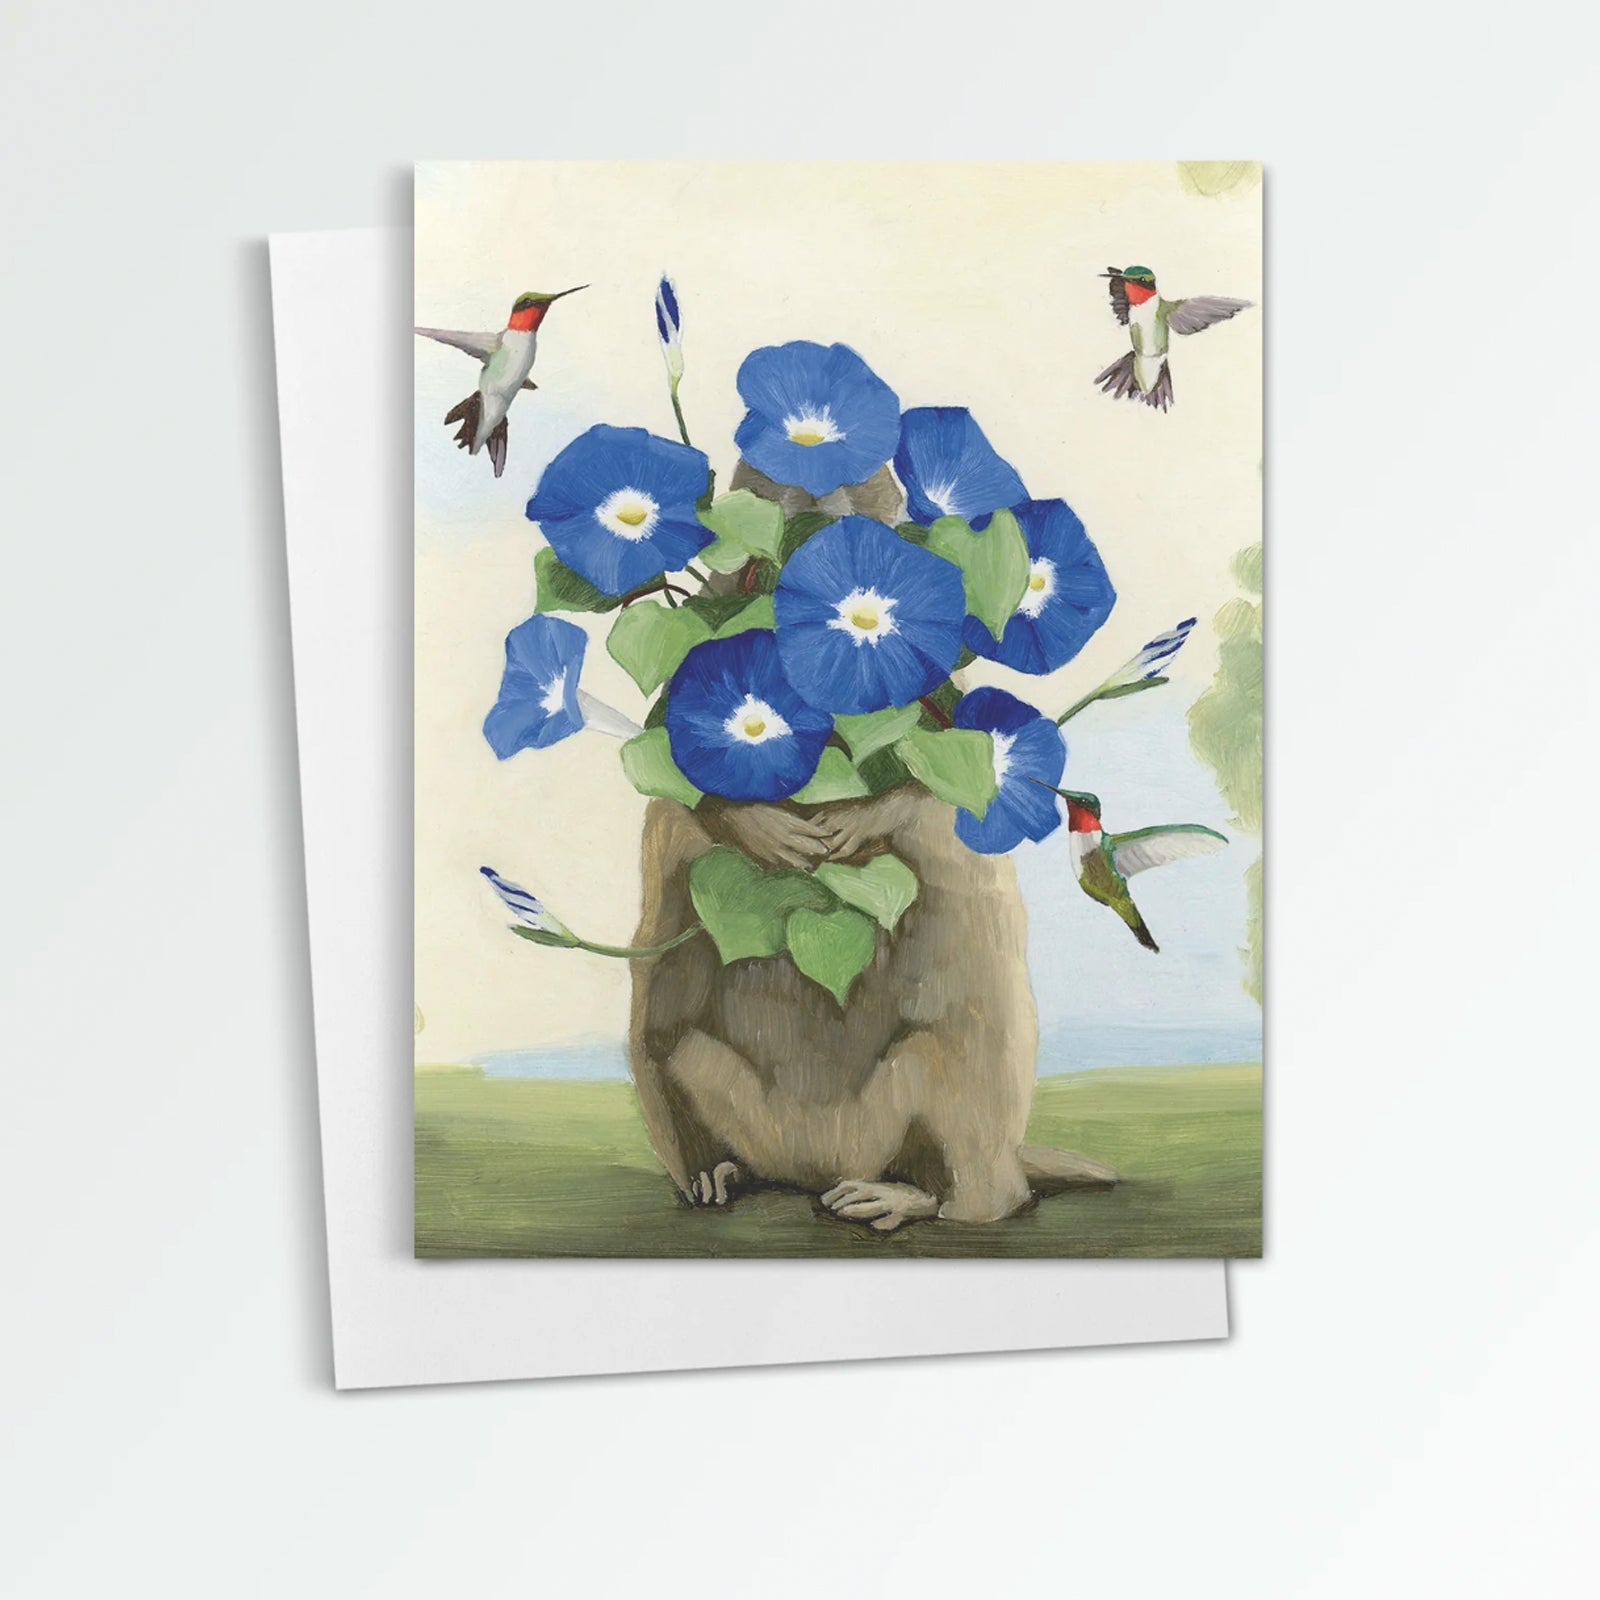 Groundhog with Morning Glories notecard from Kim Ferreira. A groundhog hold blue morning glory flowers and ruby throated hummingbirds fly around.